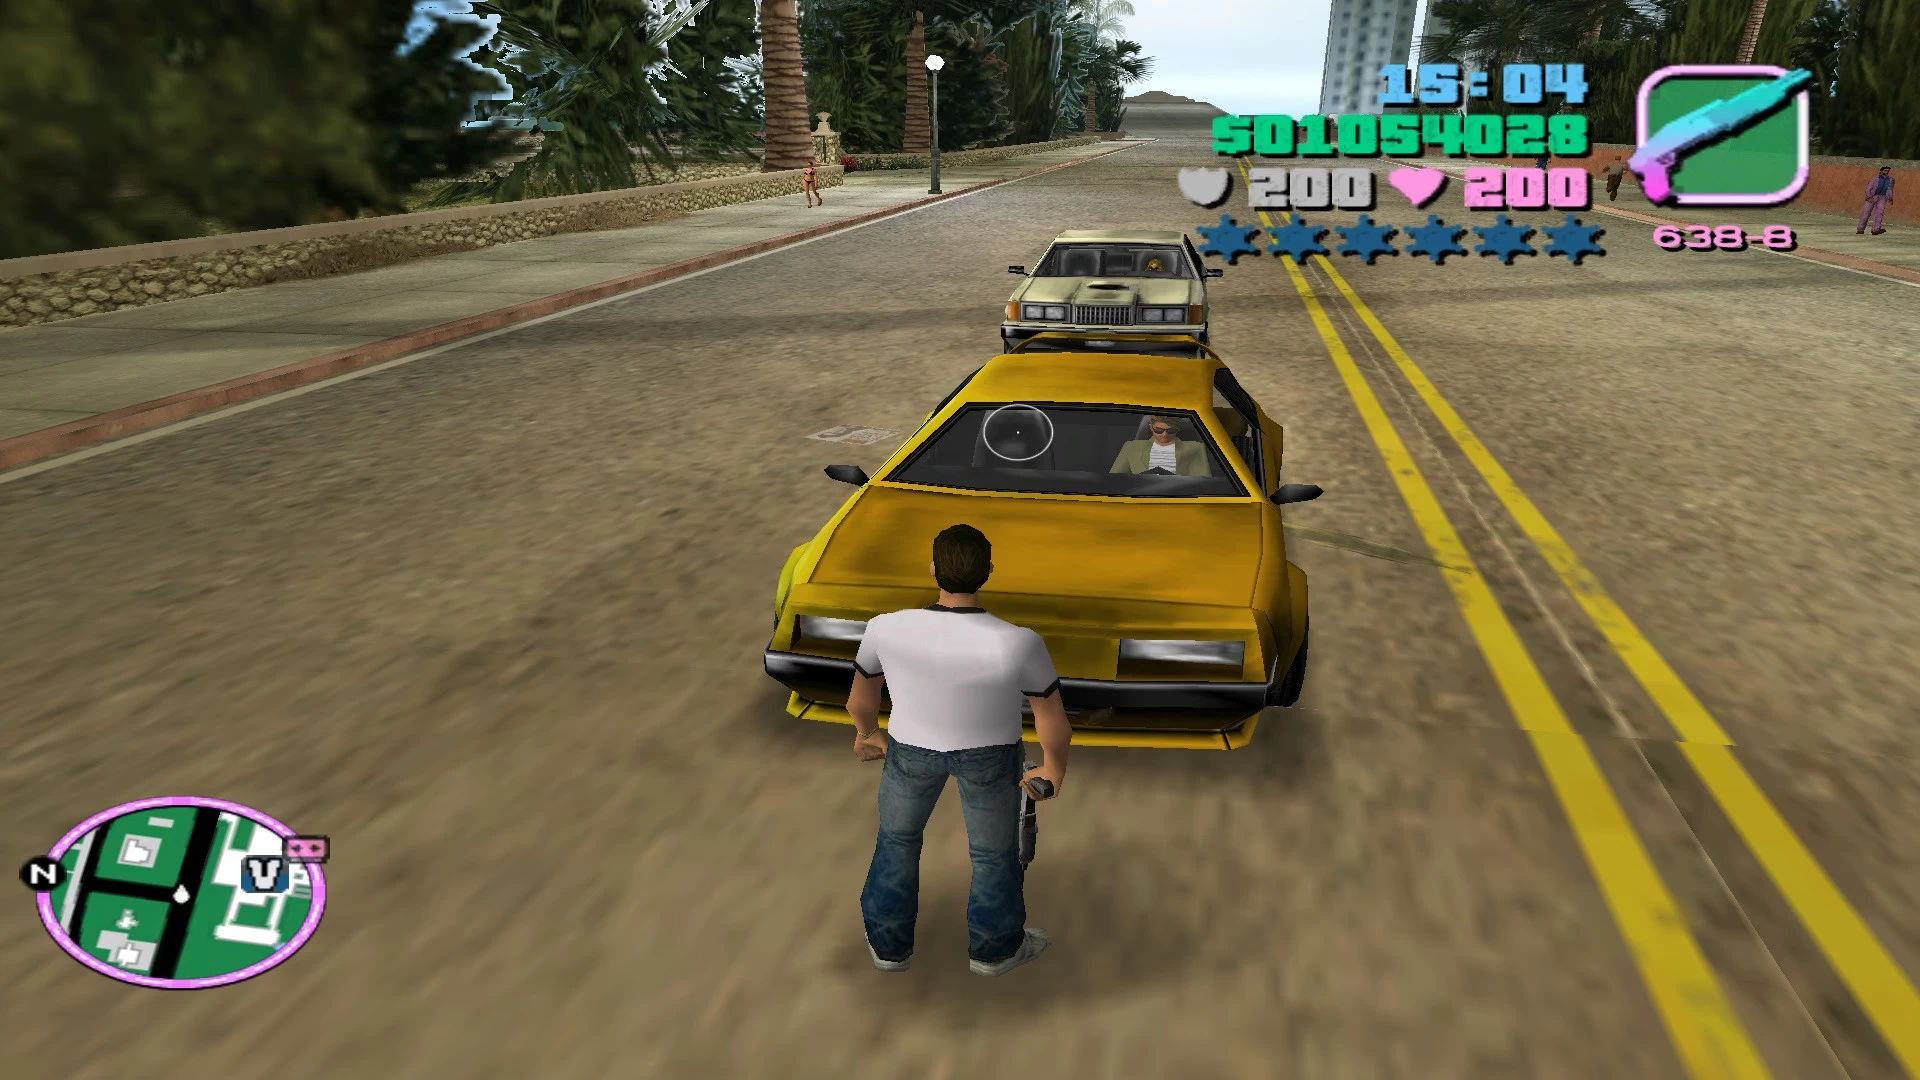 Gta vice city lite apk download for android